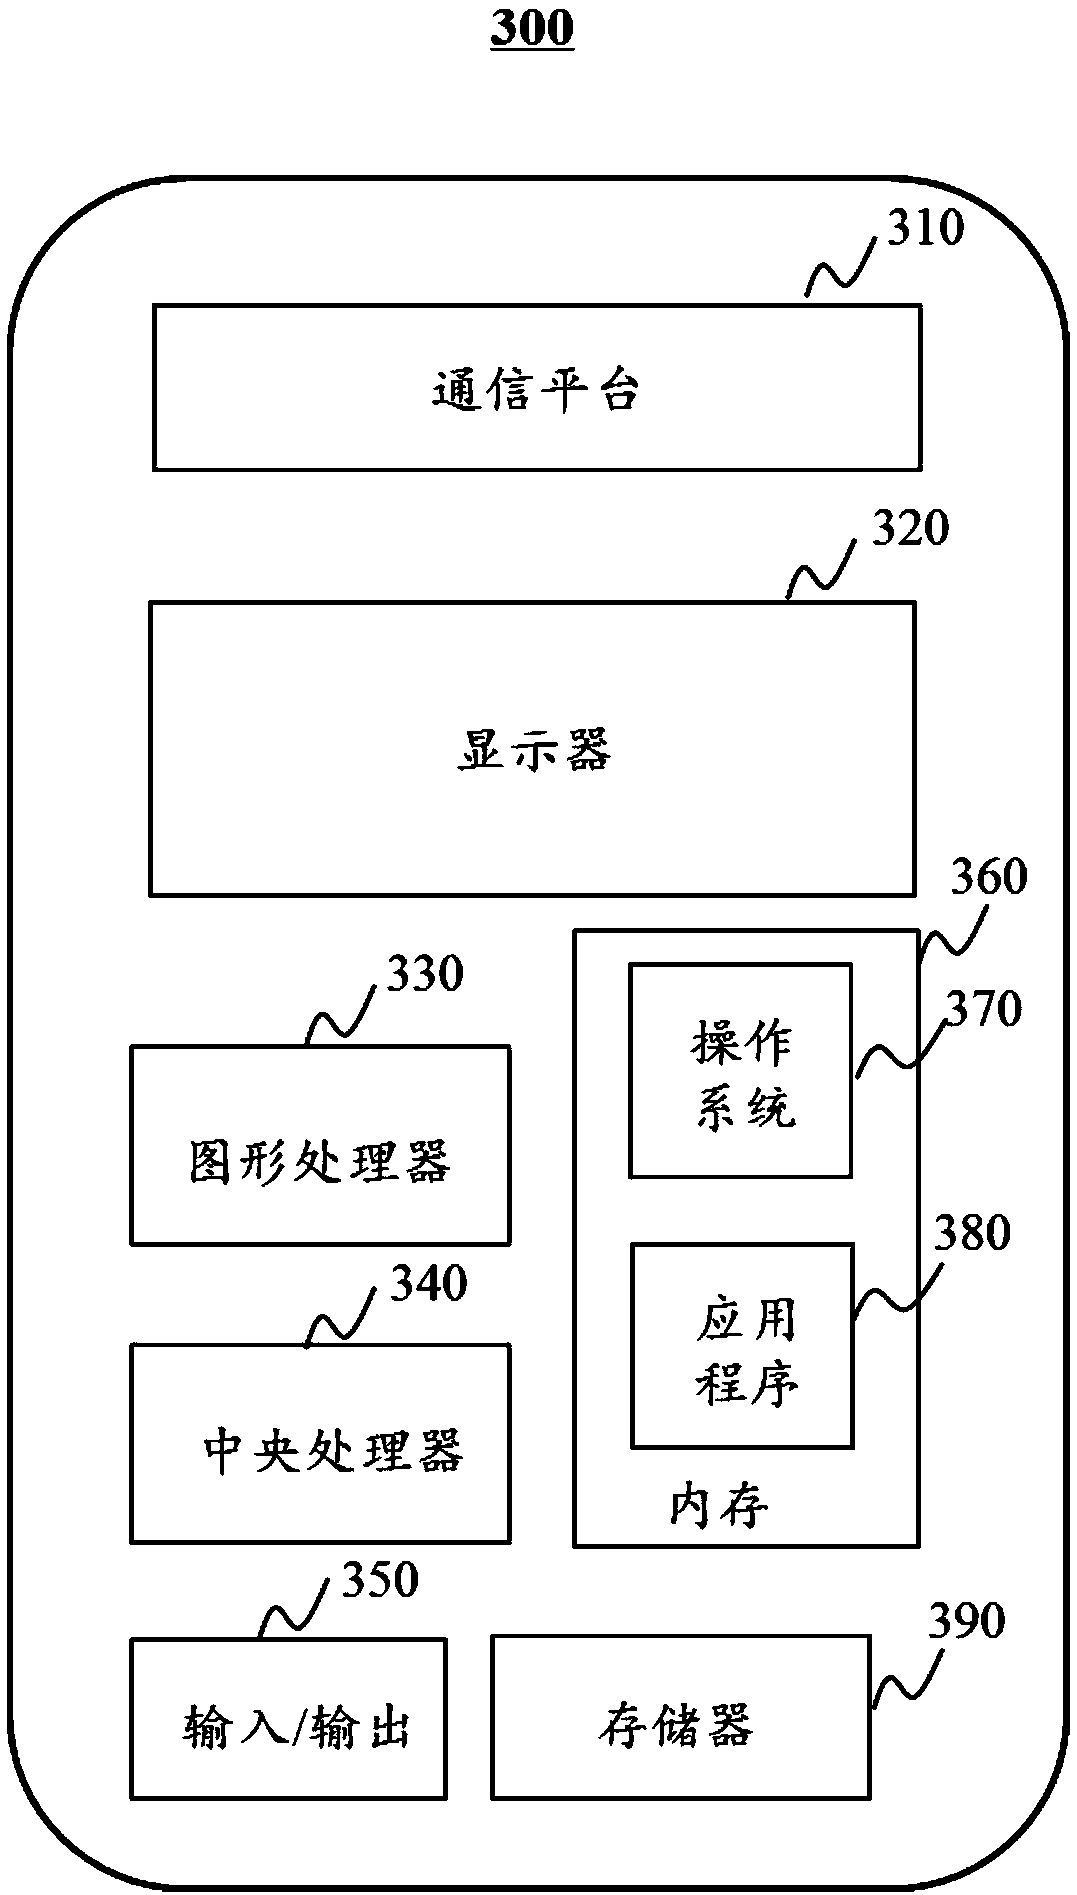 System and method for reducing radiation dosage